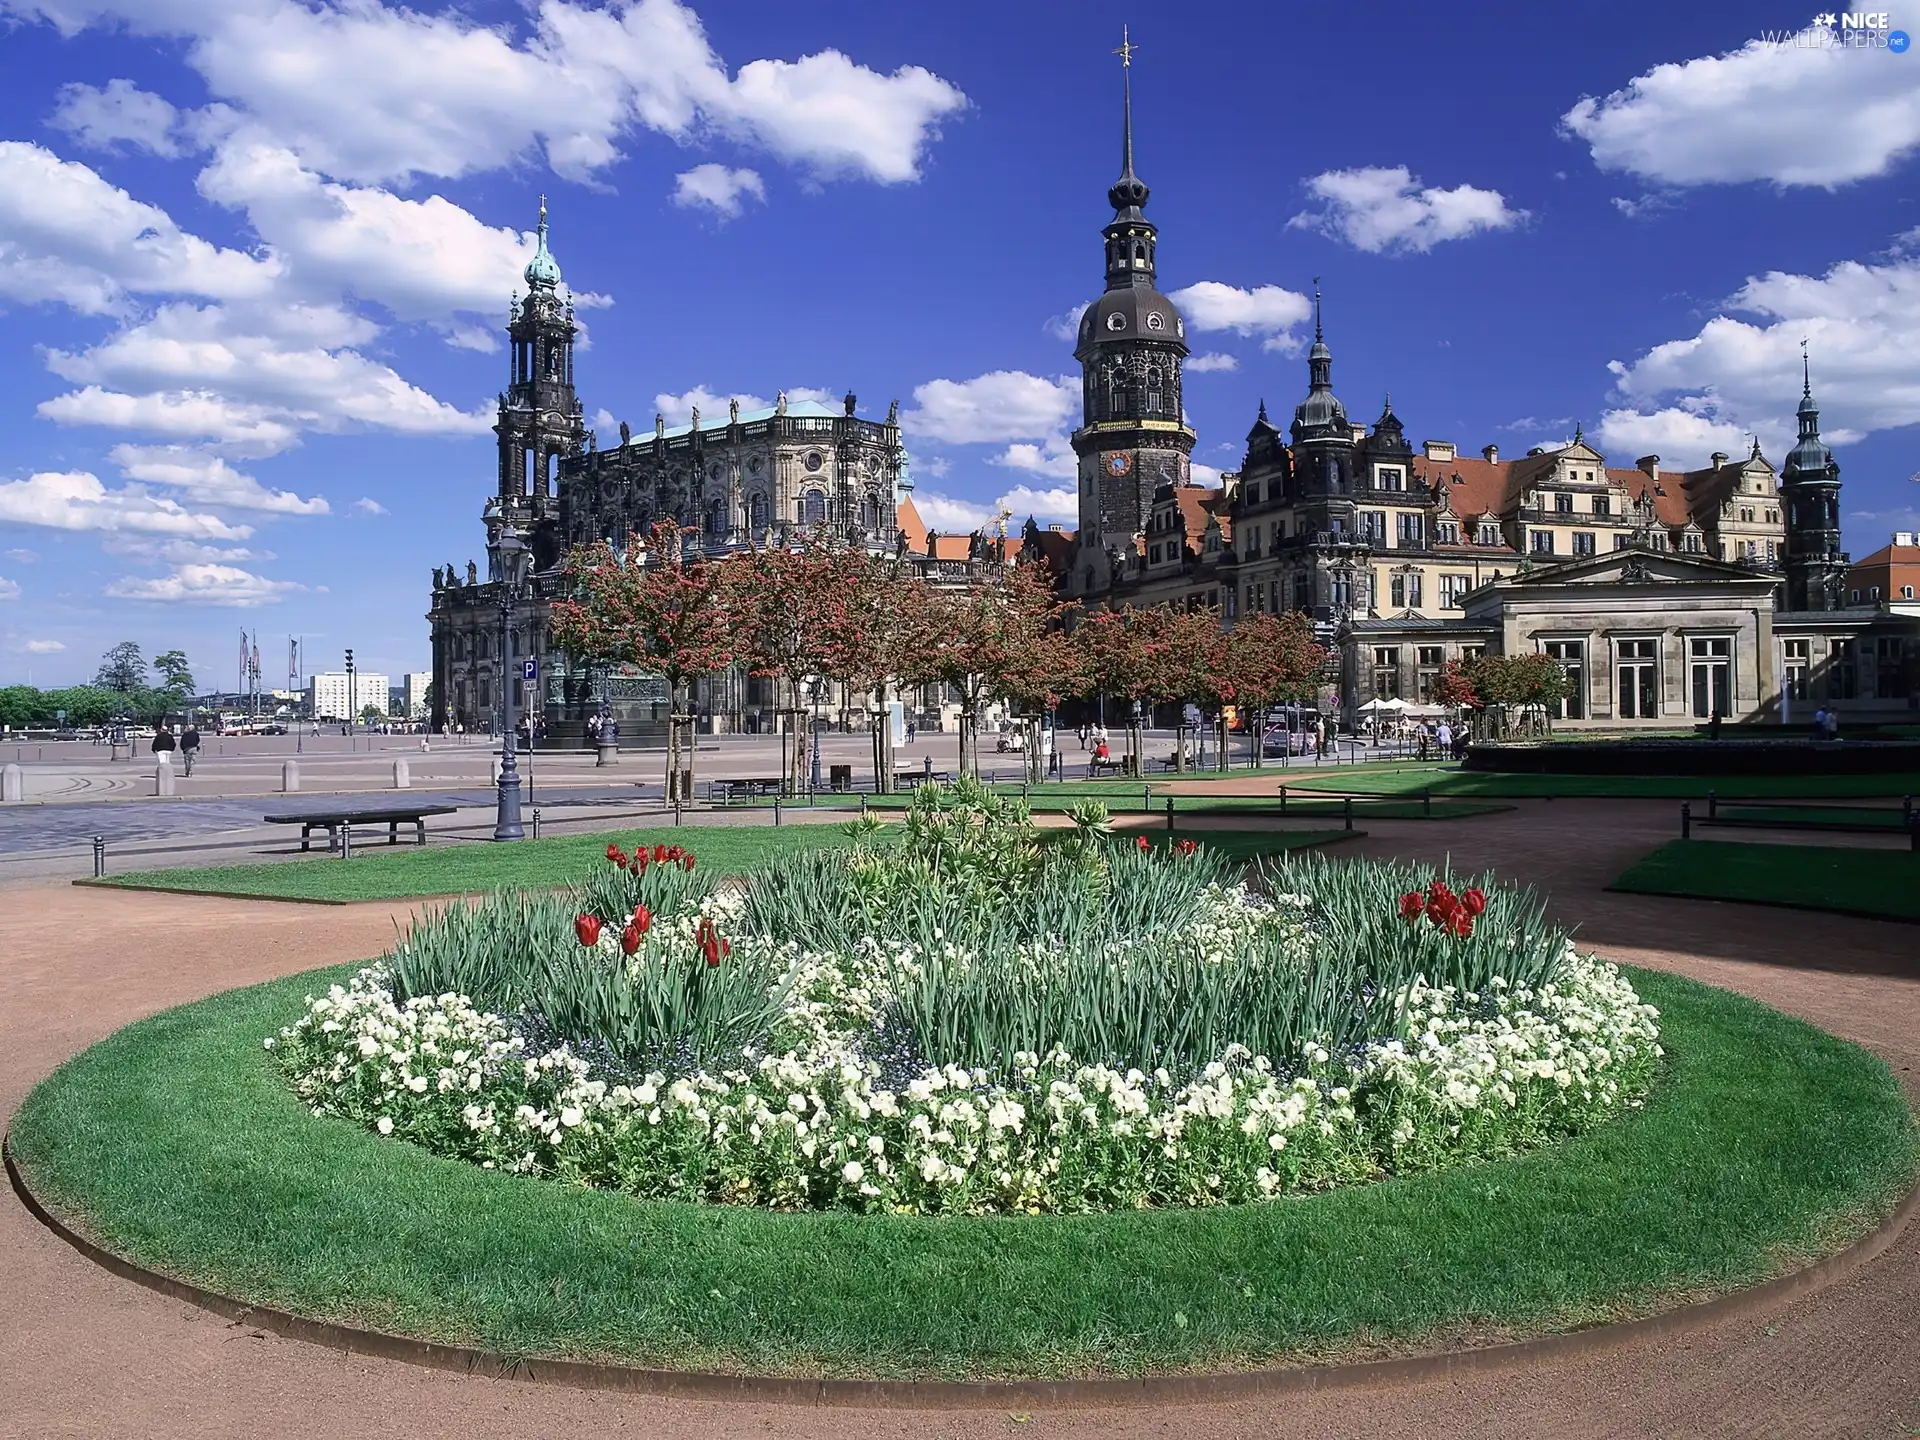 flowerbed, buildings, Germany, Theatre Square, Dresden